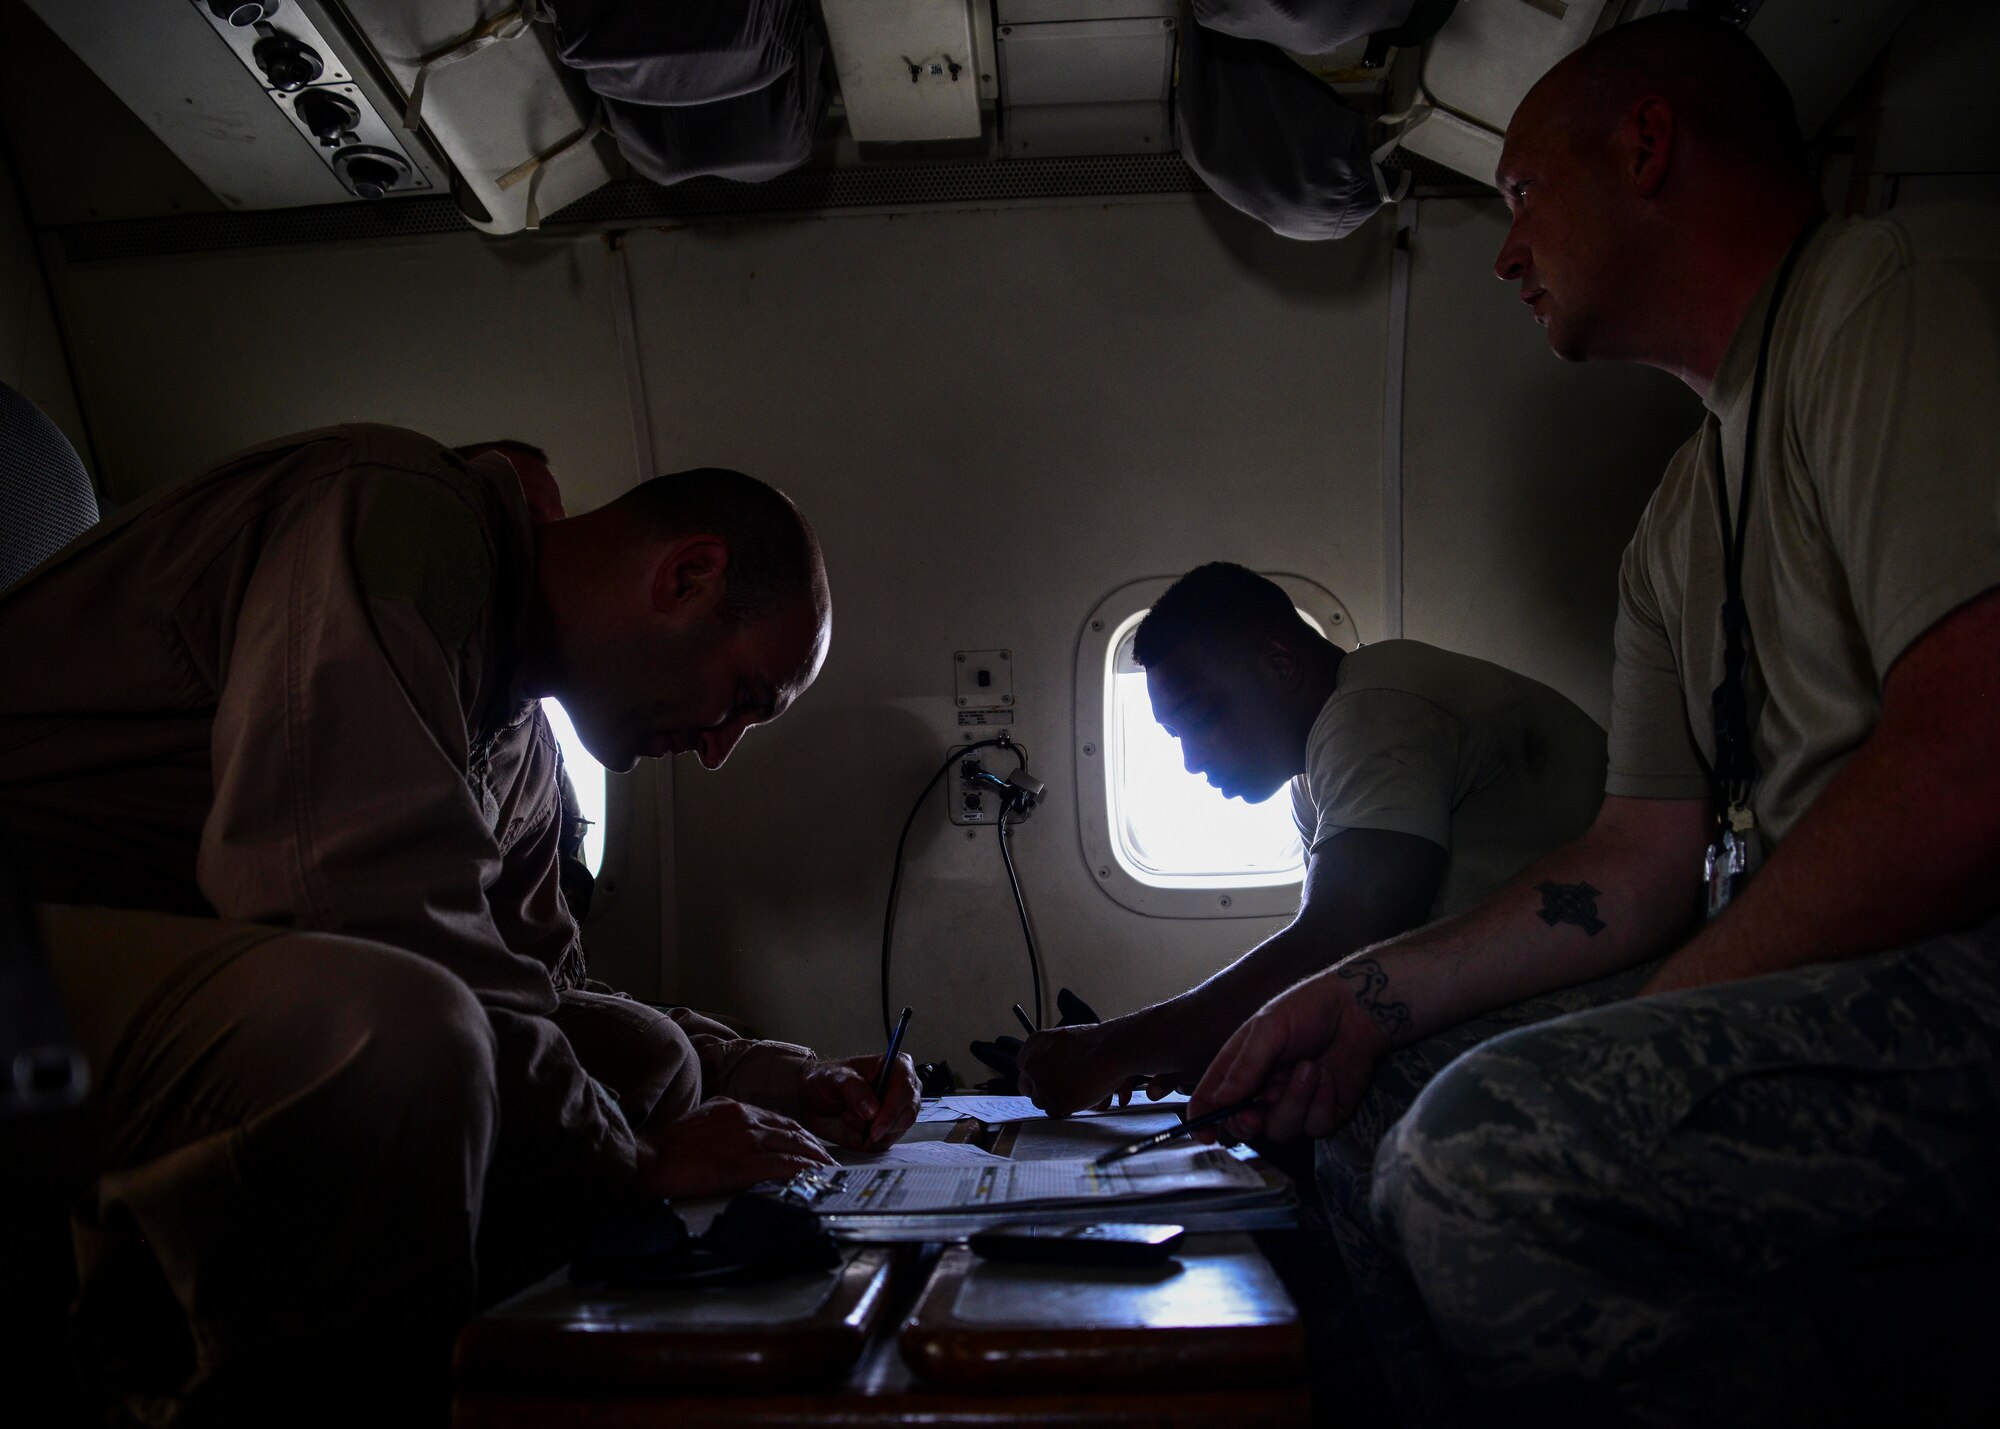 Joint Surveillance Target Attack Radar Systems aircrew and 7th Expeditionary Air Mobility Unit maintenance Airmen conduct a post-flight maintenance debrief June 7, 2016, at Al Udeid Air Base, Qatar. The E-8C JSTARS and its active duty, guard and reserve service members conduct missions overseas to support operations on the war on terror. (U.S. Air Force photo/Senior Airman Janelle Patiño/Released)